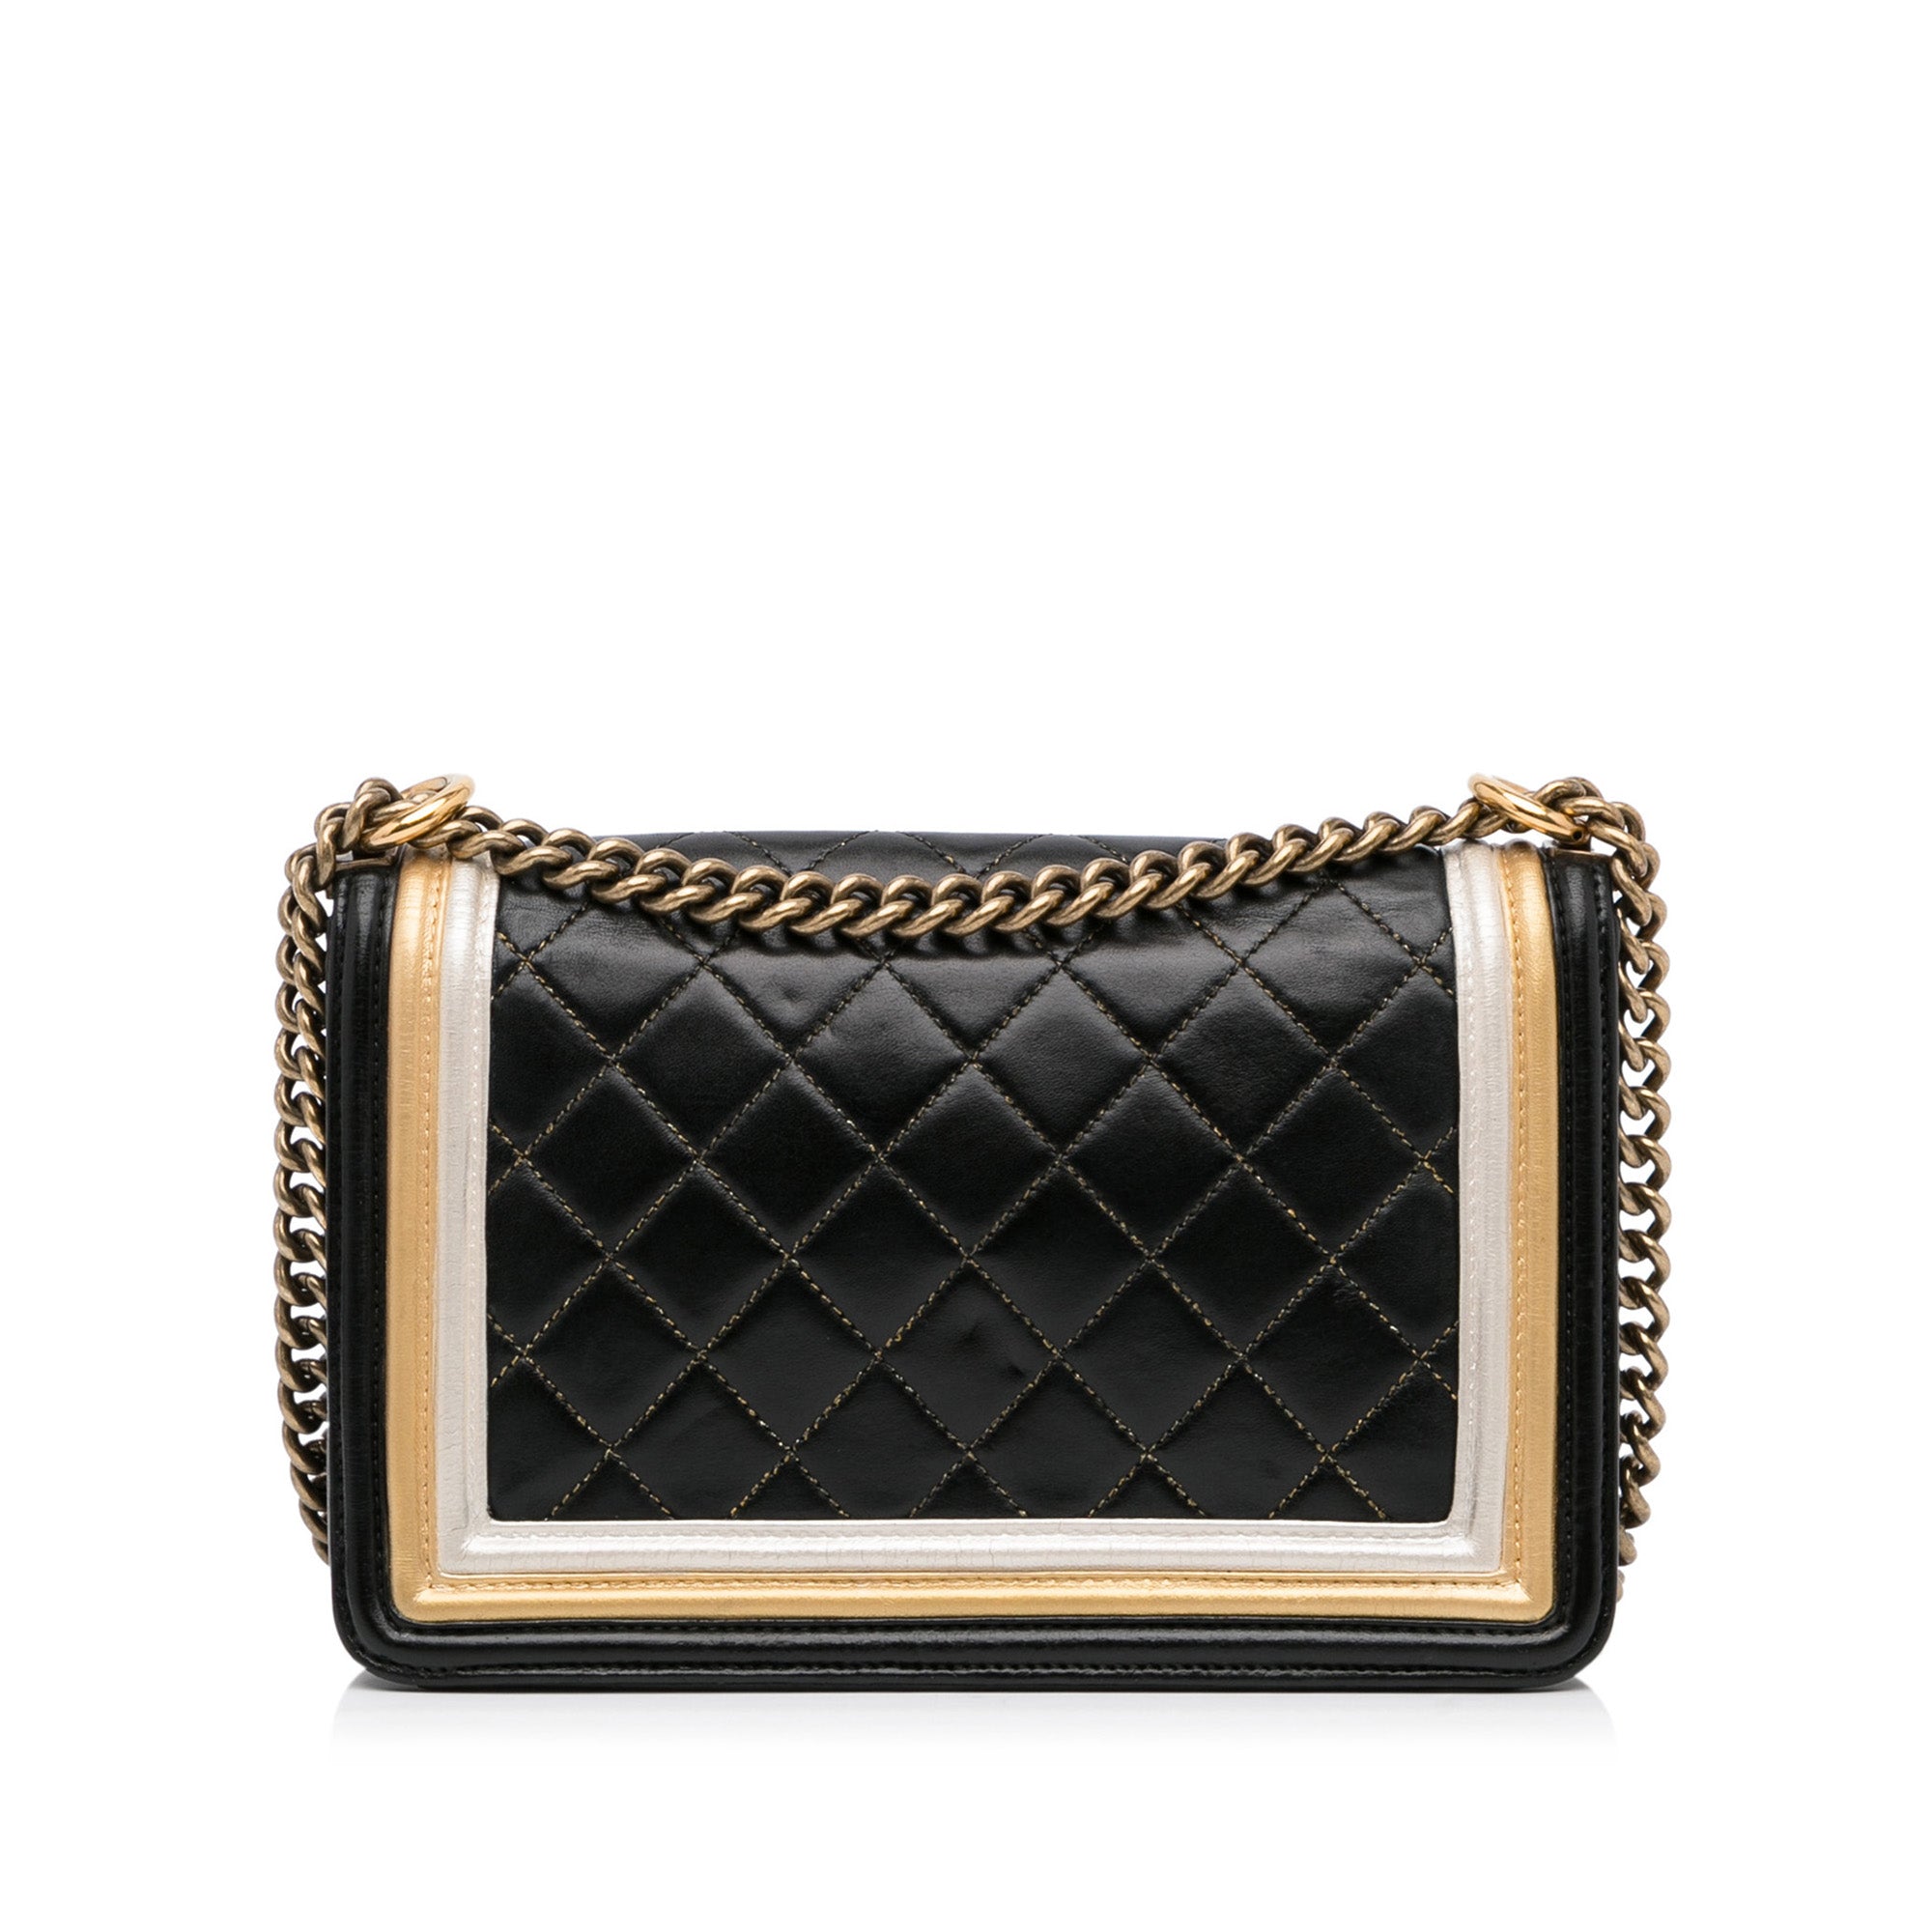 Chanel Le Boy Bag - Design Overview and Brief History